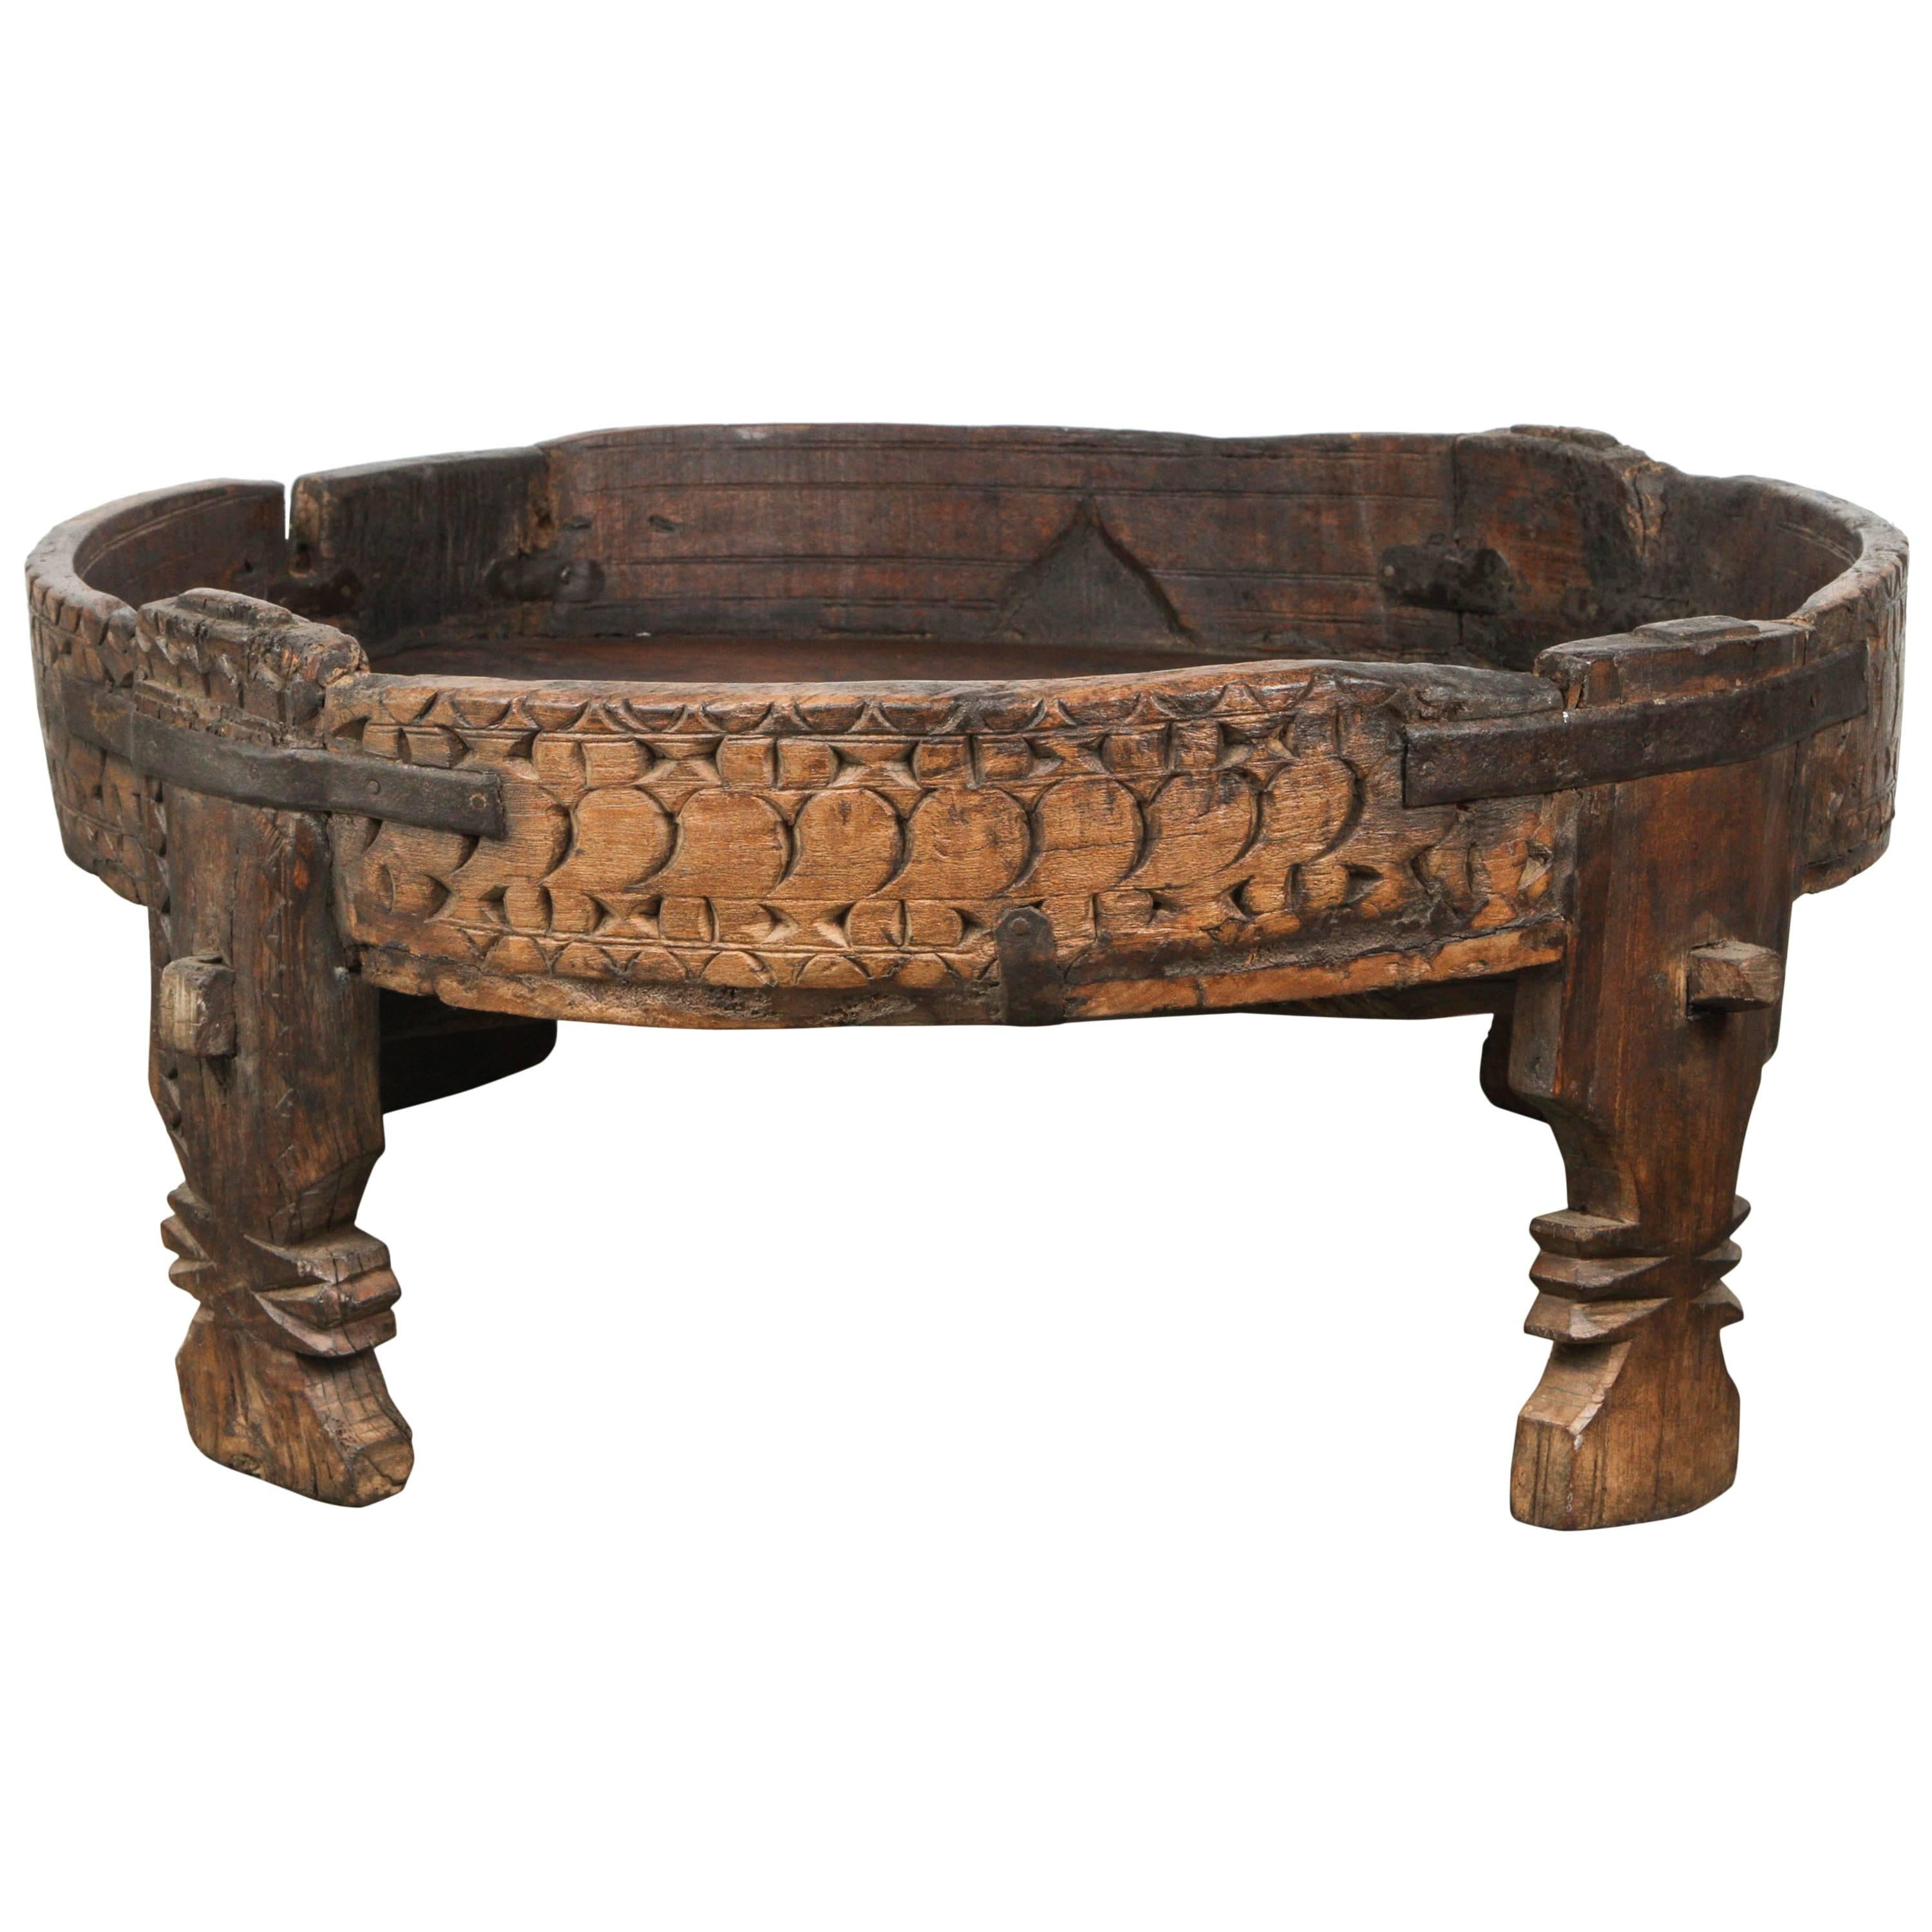 Moroccan Round Wooden Tribal Table